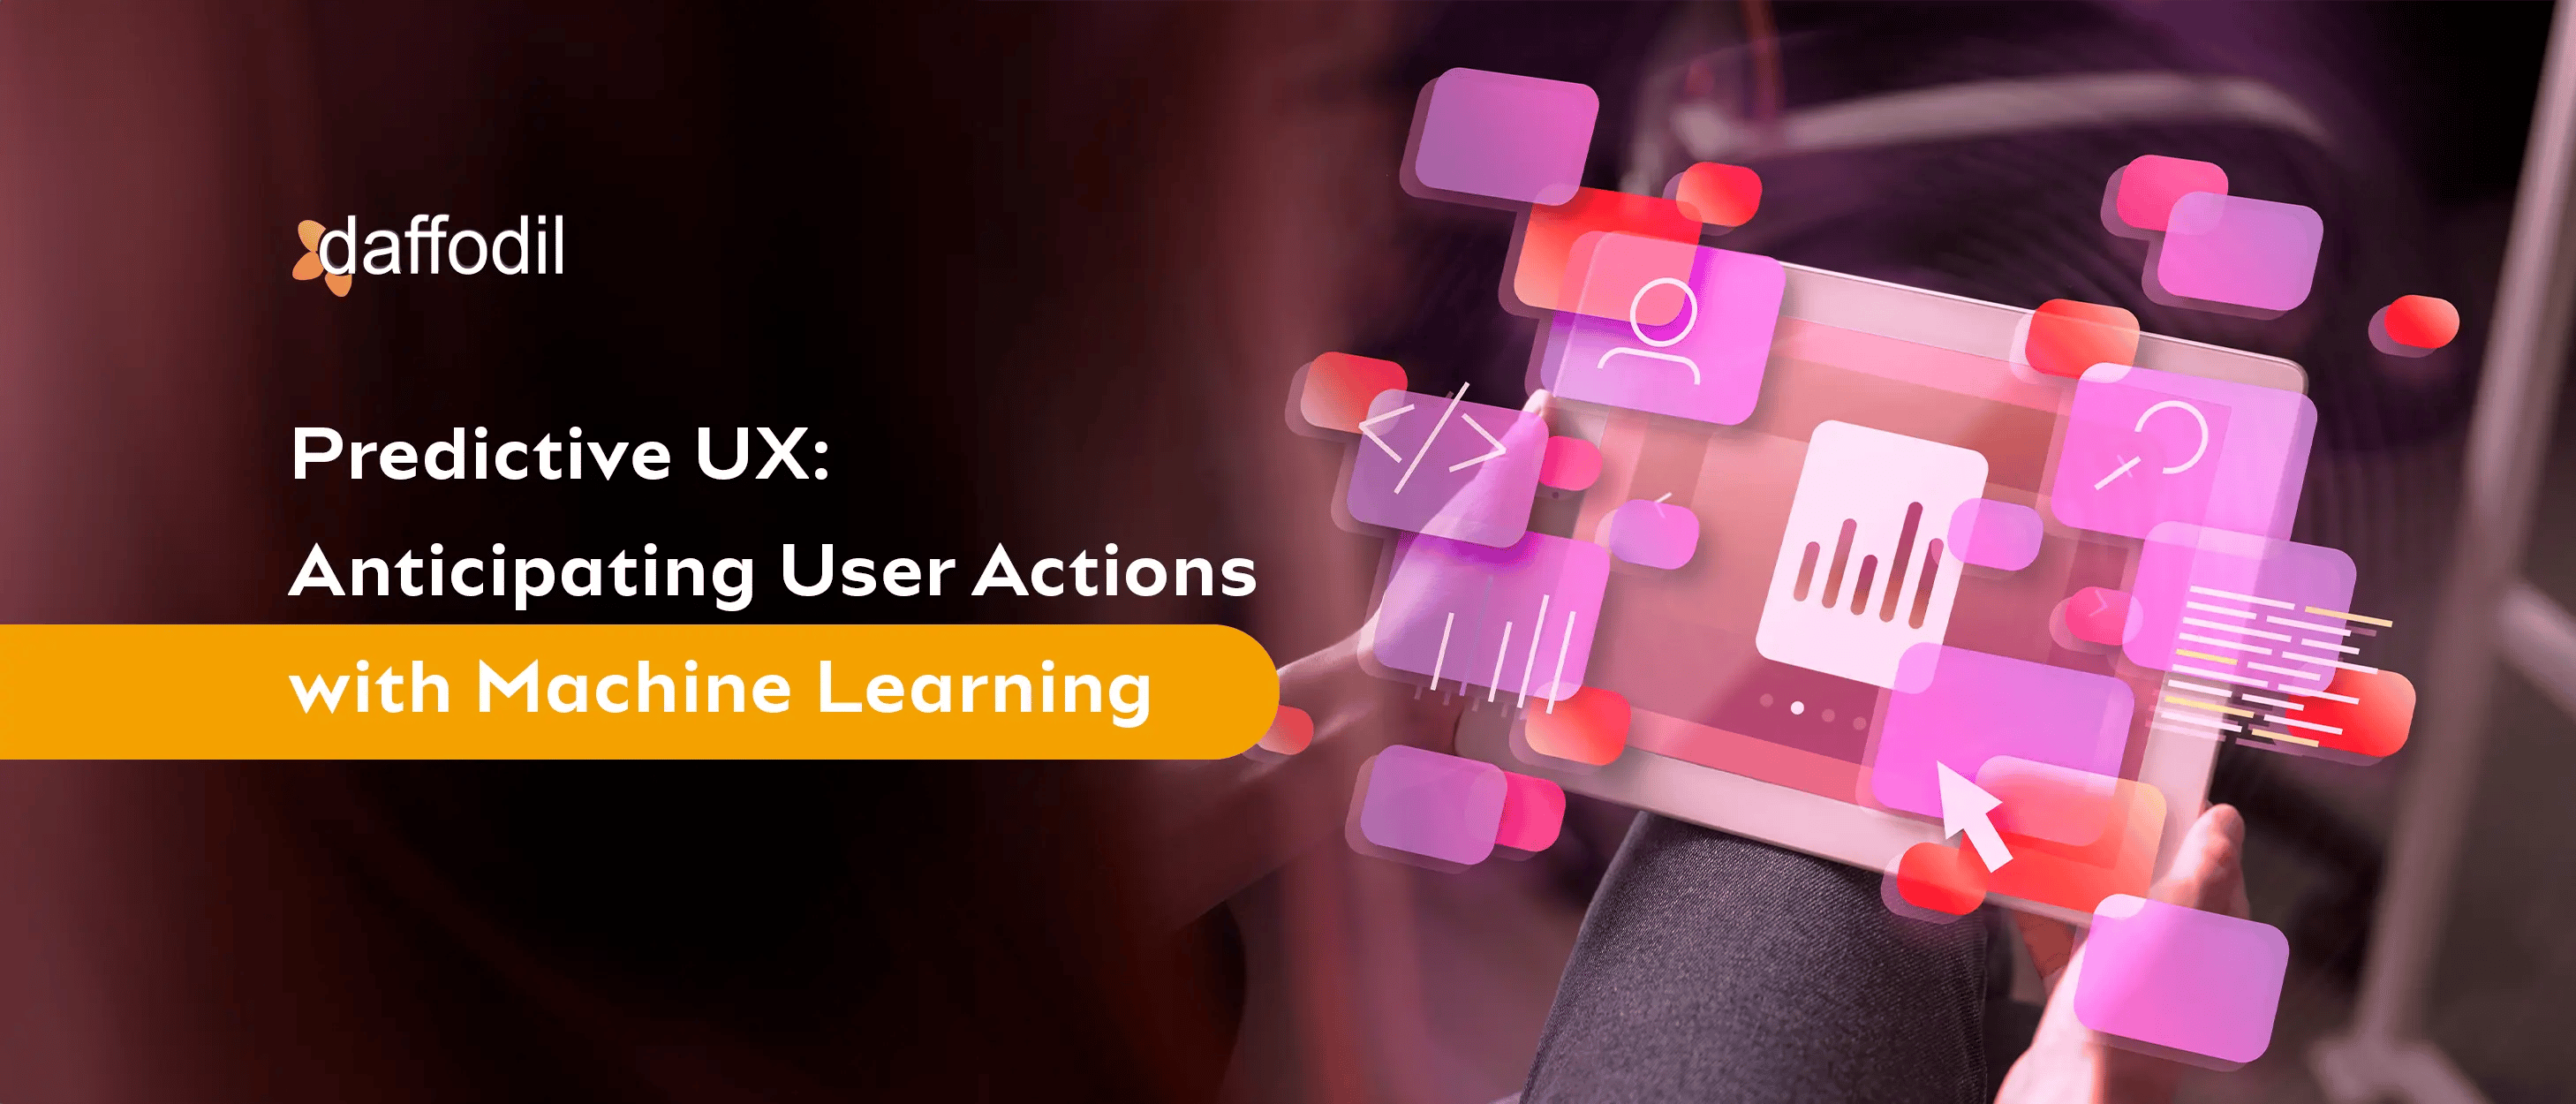 Predictive UX- Anticipating User Actions with Machine Learning